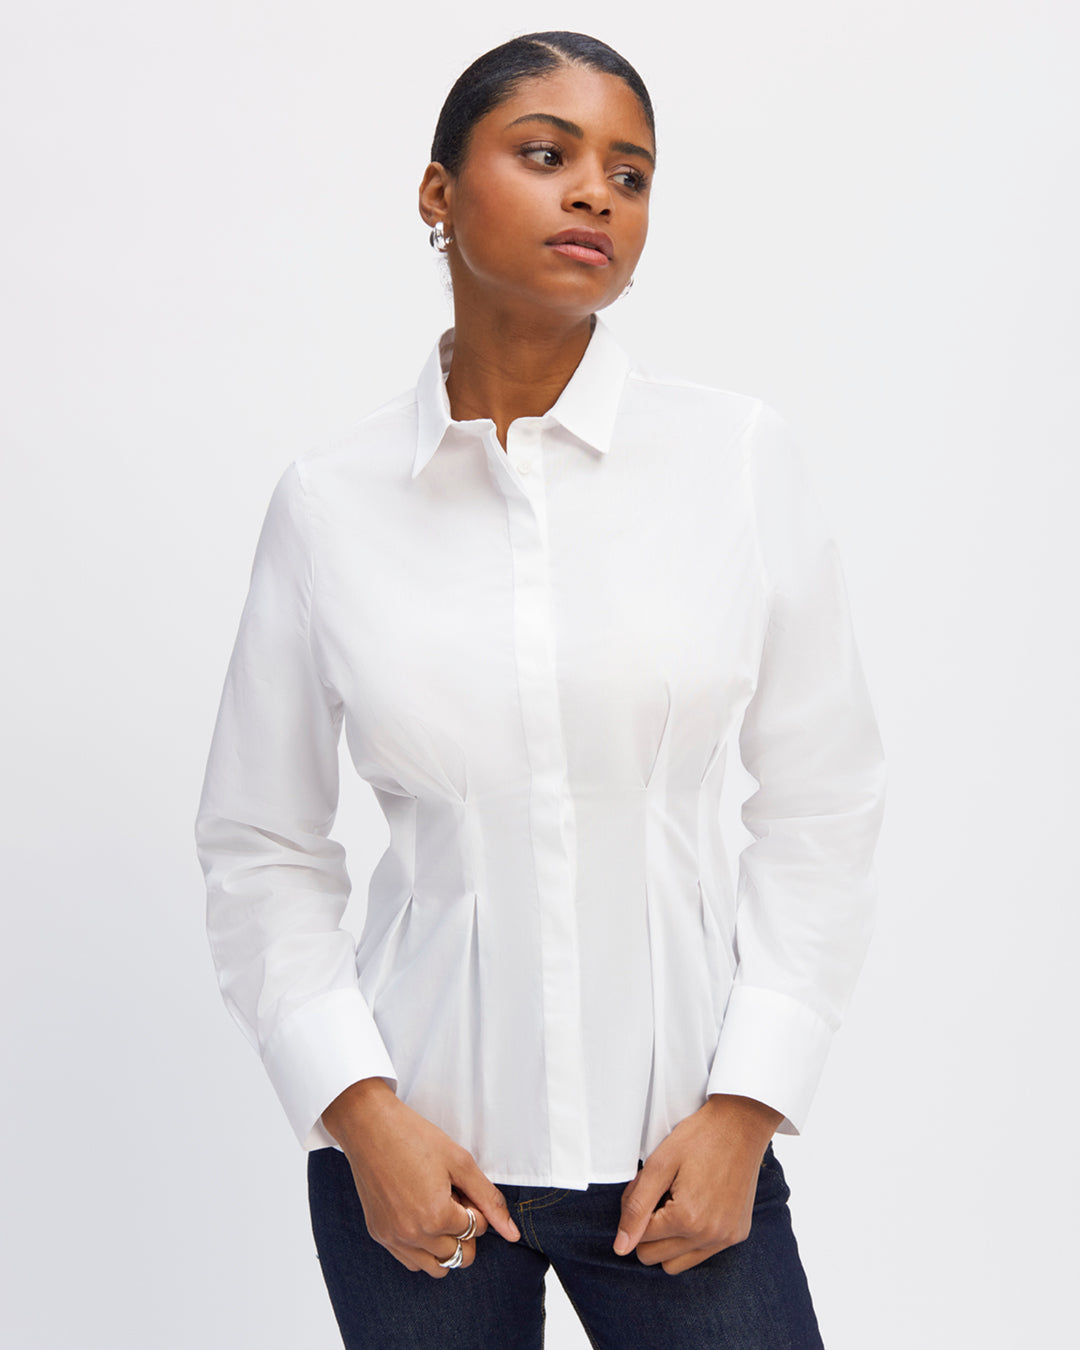 Shirt-four-pinches-front-four-pinches-back-curved-effect-Collar-shirt-Long-sleeves-Buttoned-flap-hidden-Buttoned-with-notch-17H10-suit-for-women-paris-